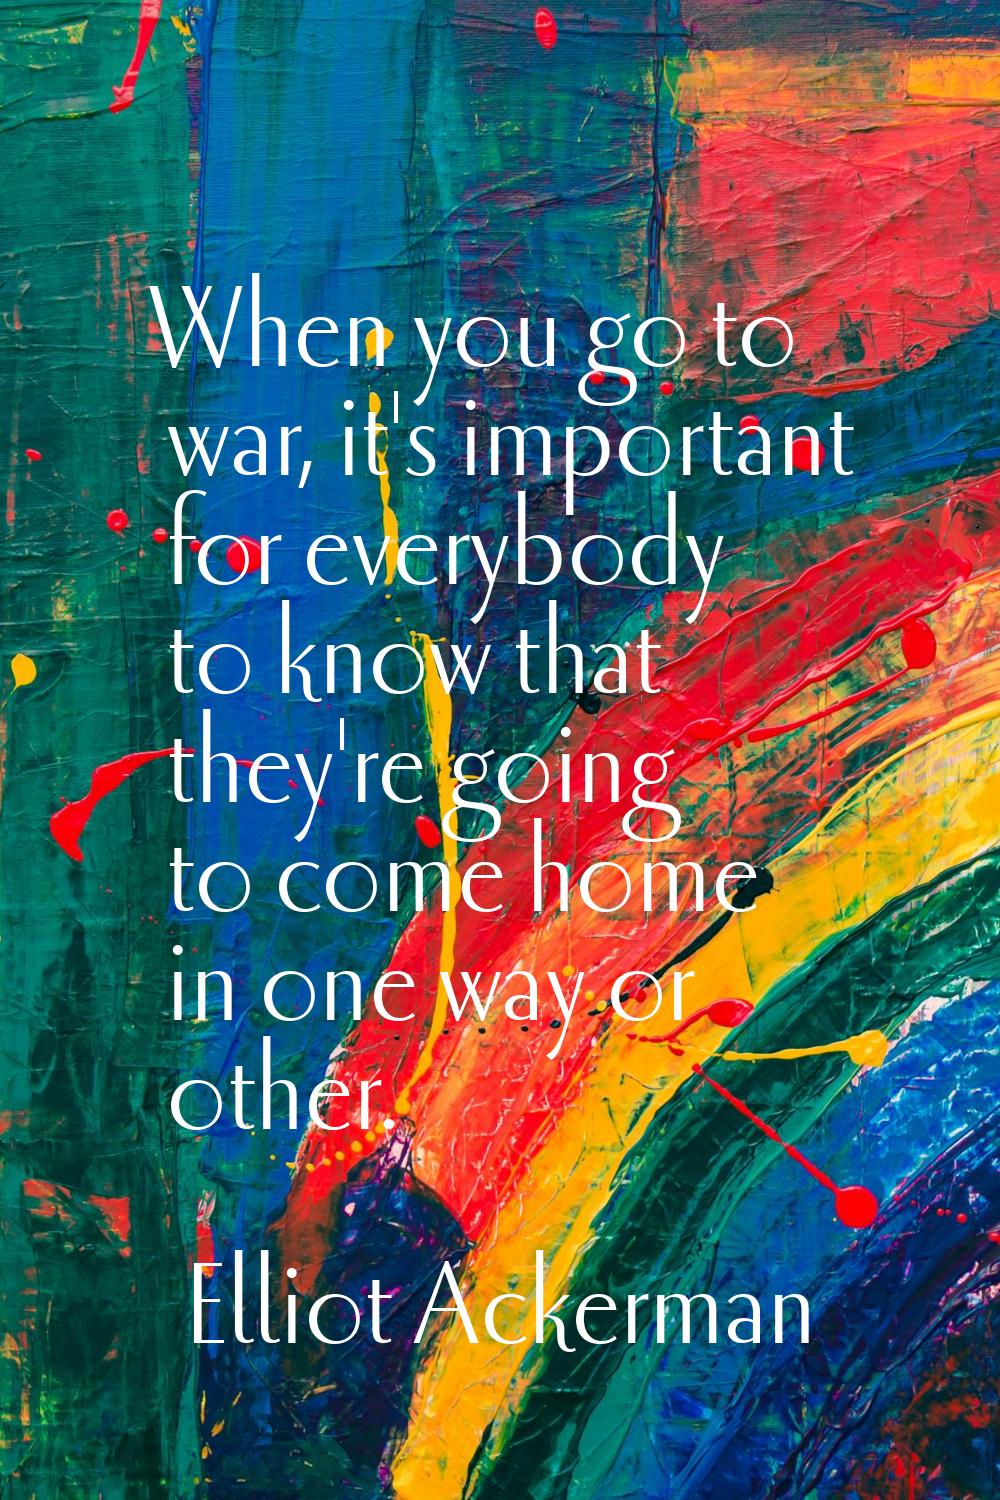 When you go to war, it's important for everybody to know that they're going to come home in one way